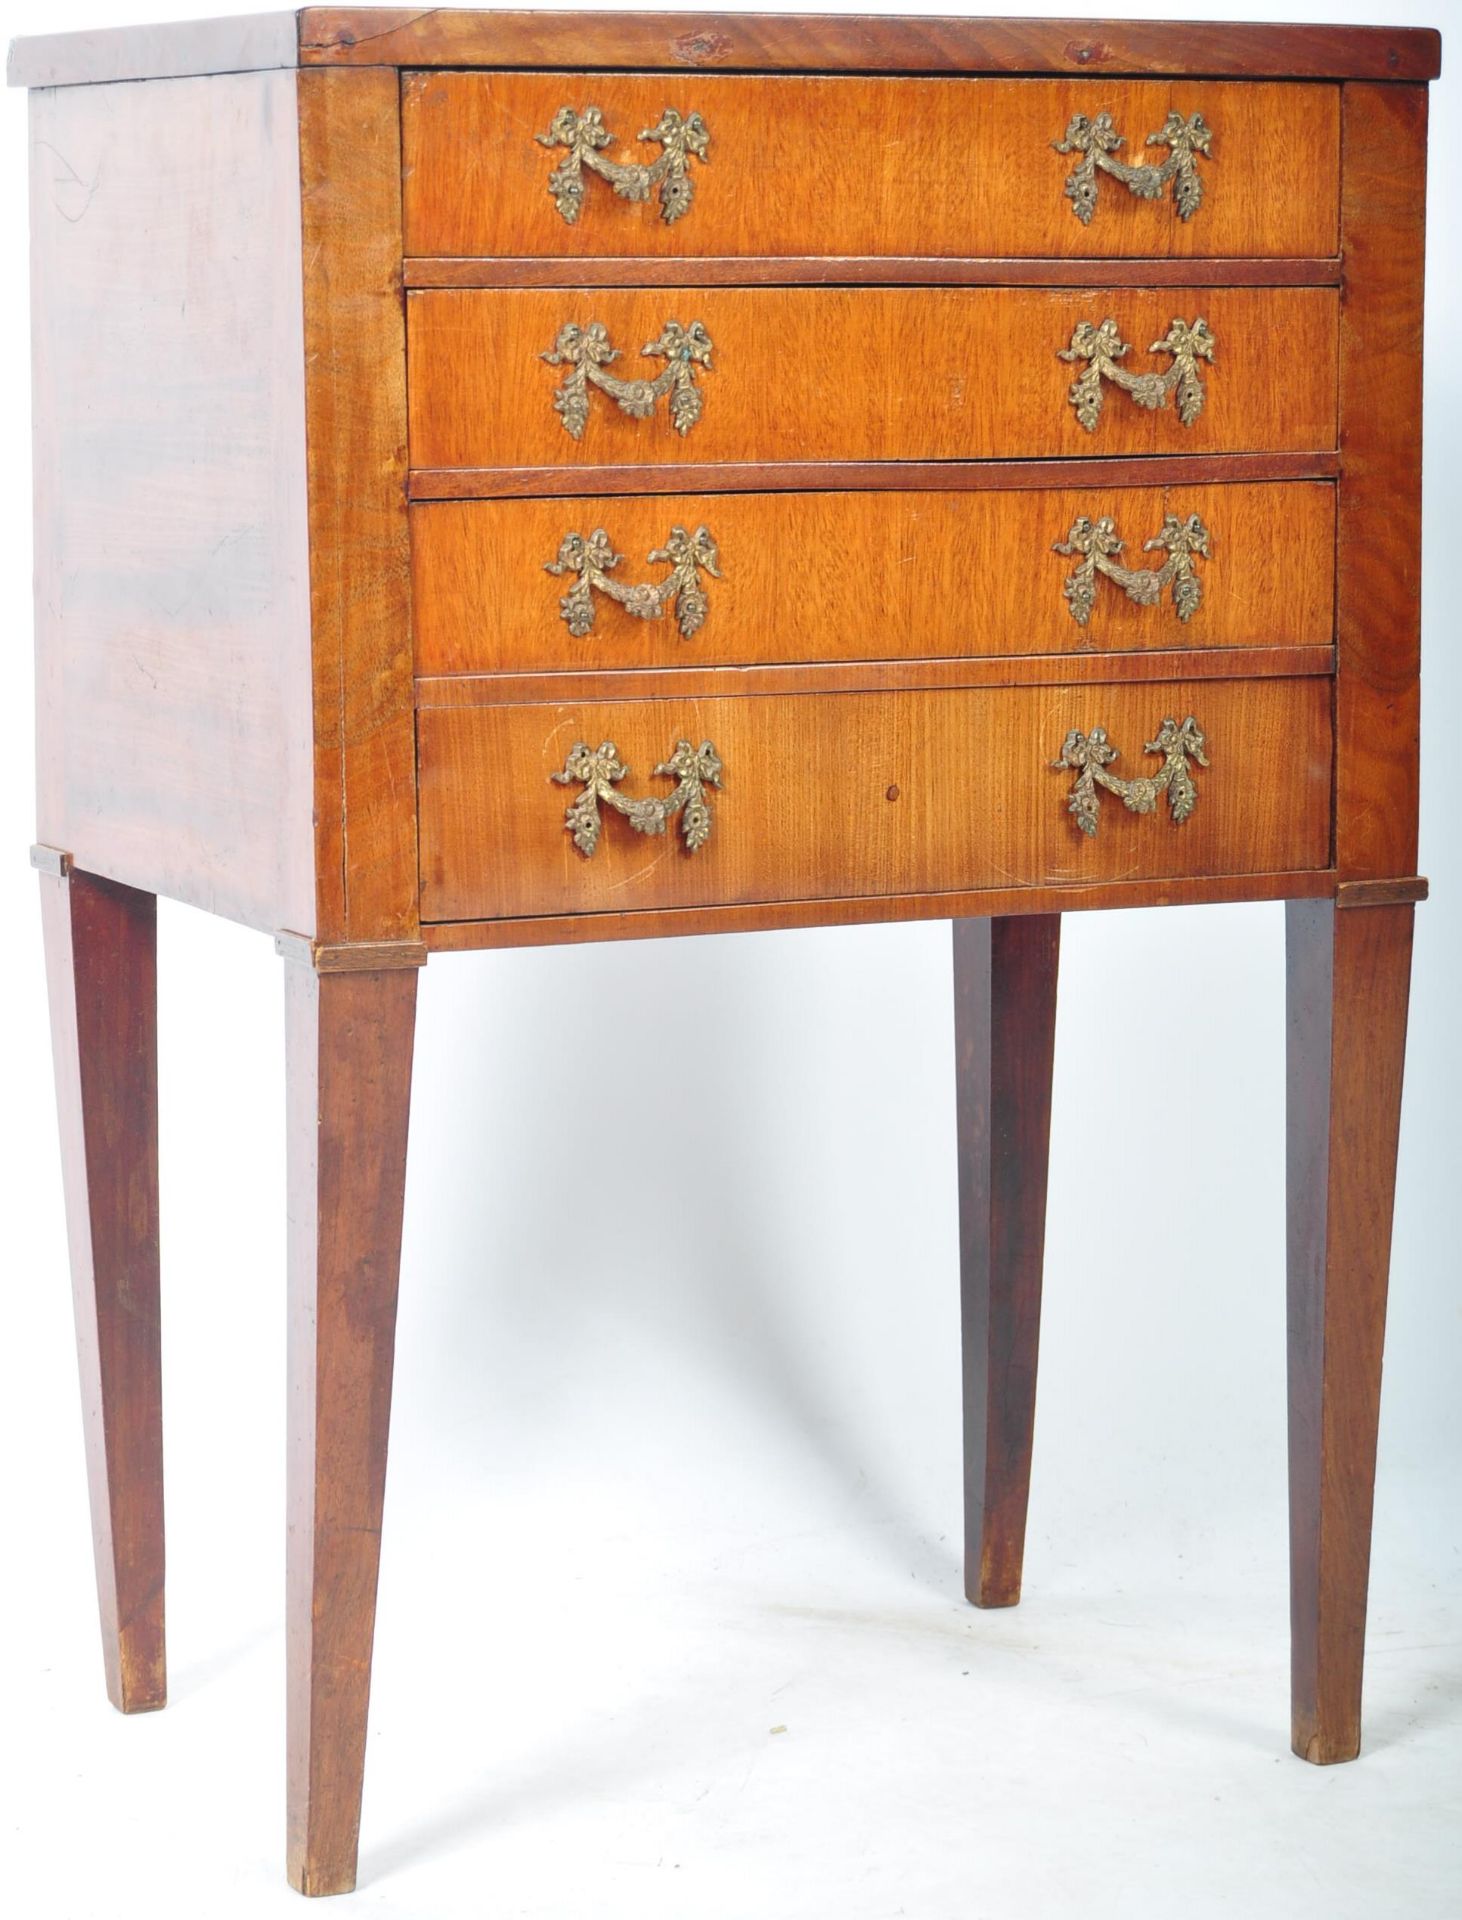 19TH CENTURY ANTIQUE CHEST OF DRAWERS ON STAND